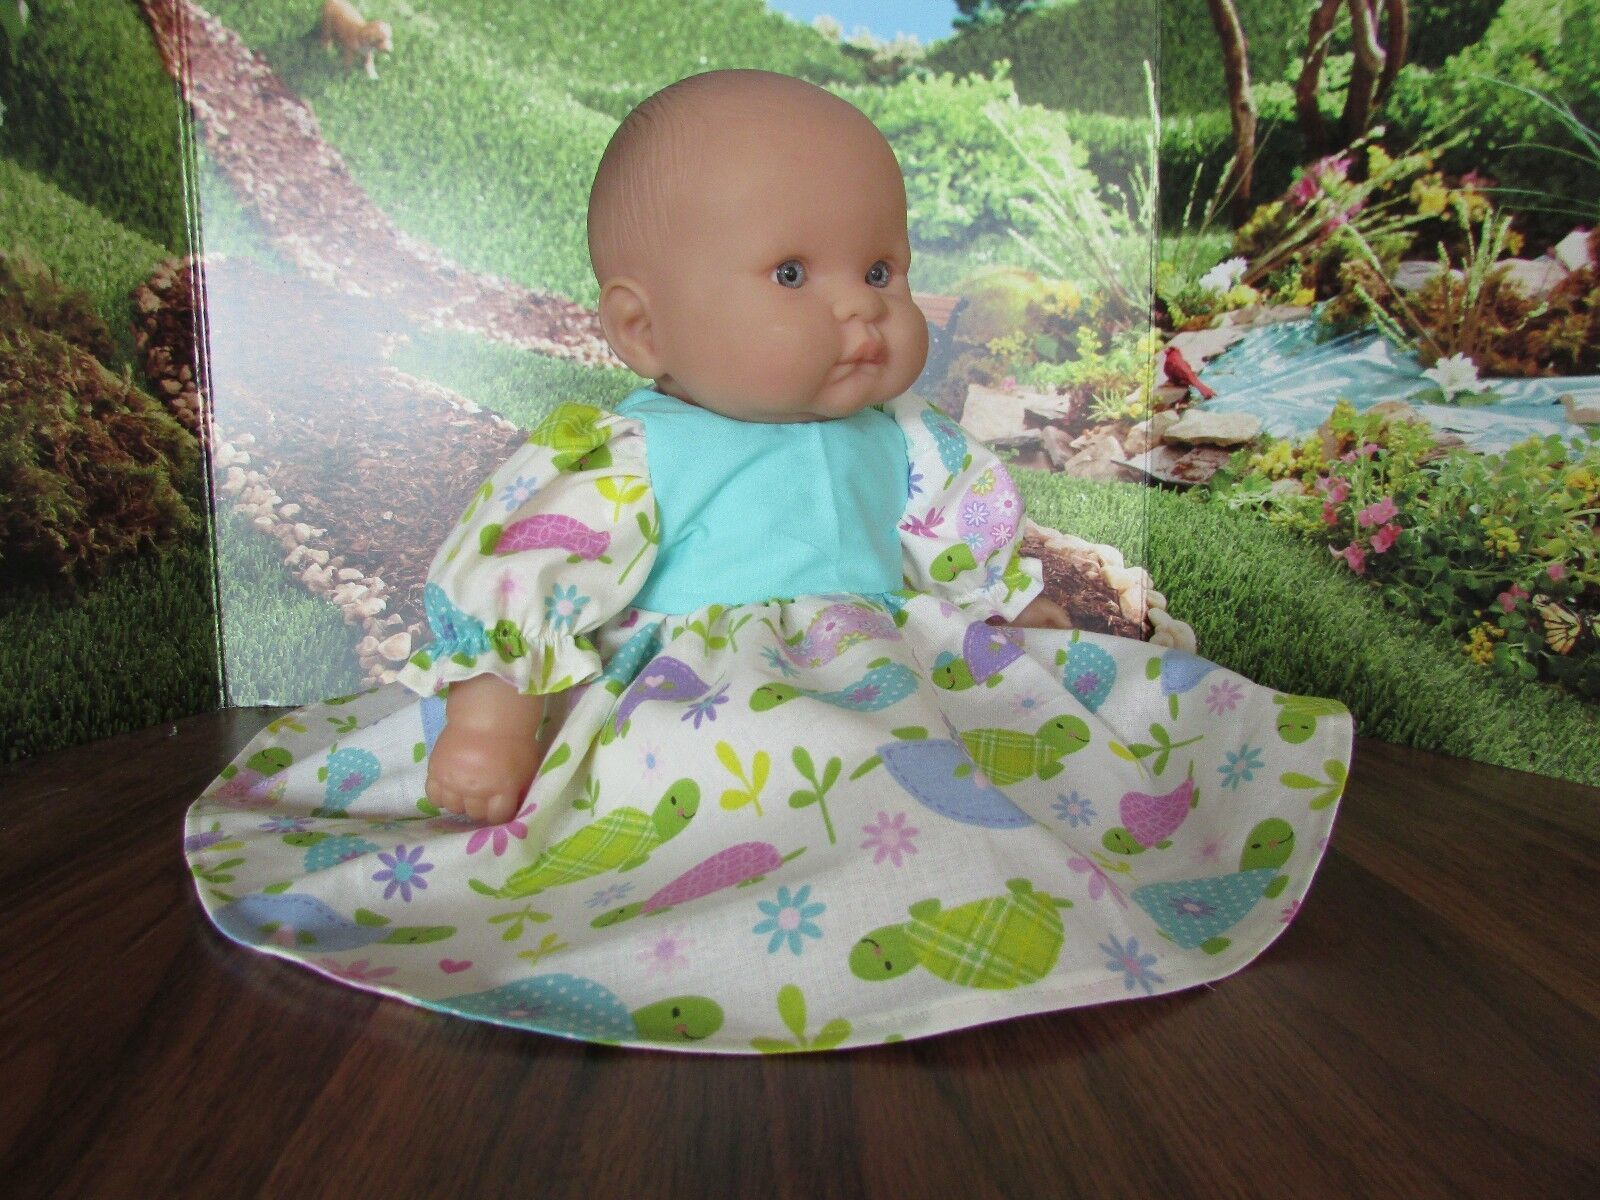 homemade doll clothes 14-16" dress turtle berenguer/american bitty baby - $16.20